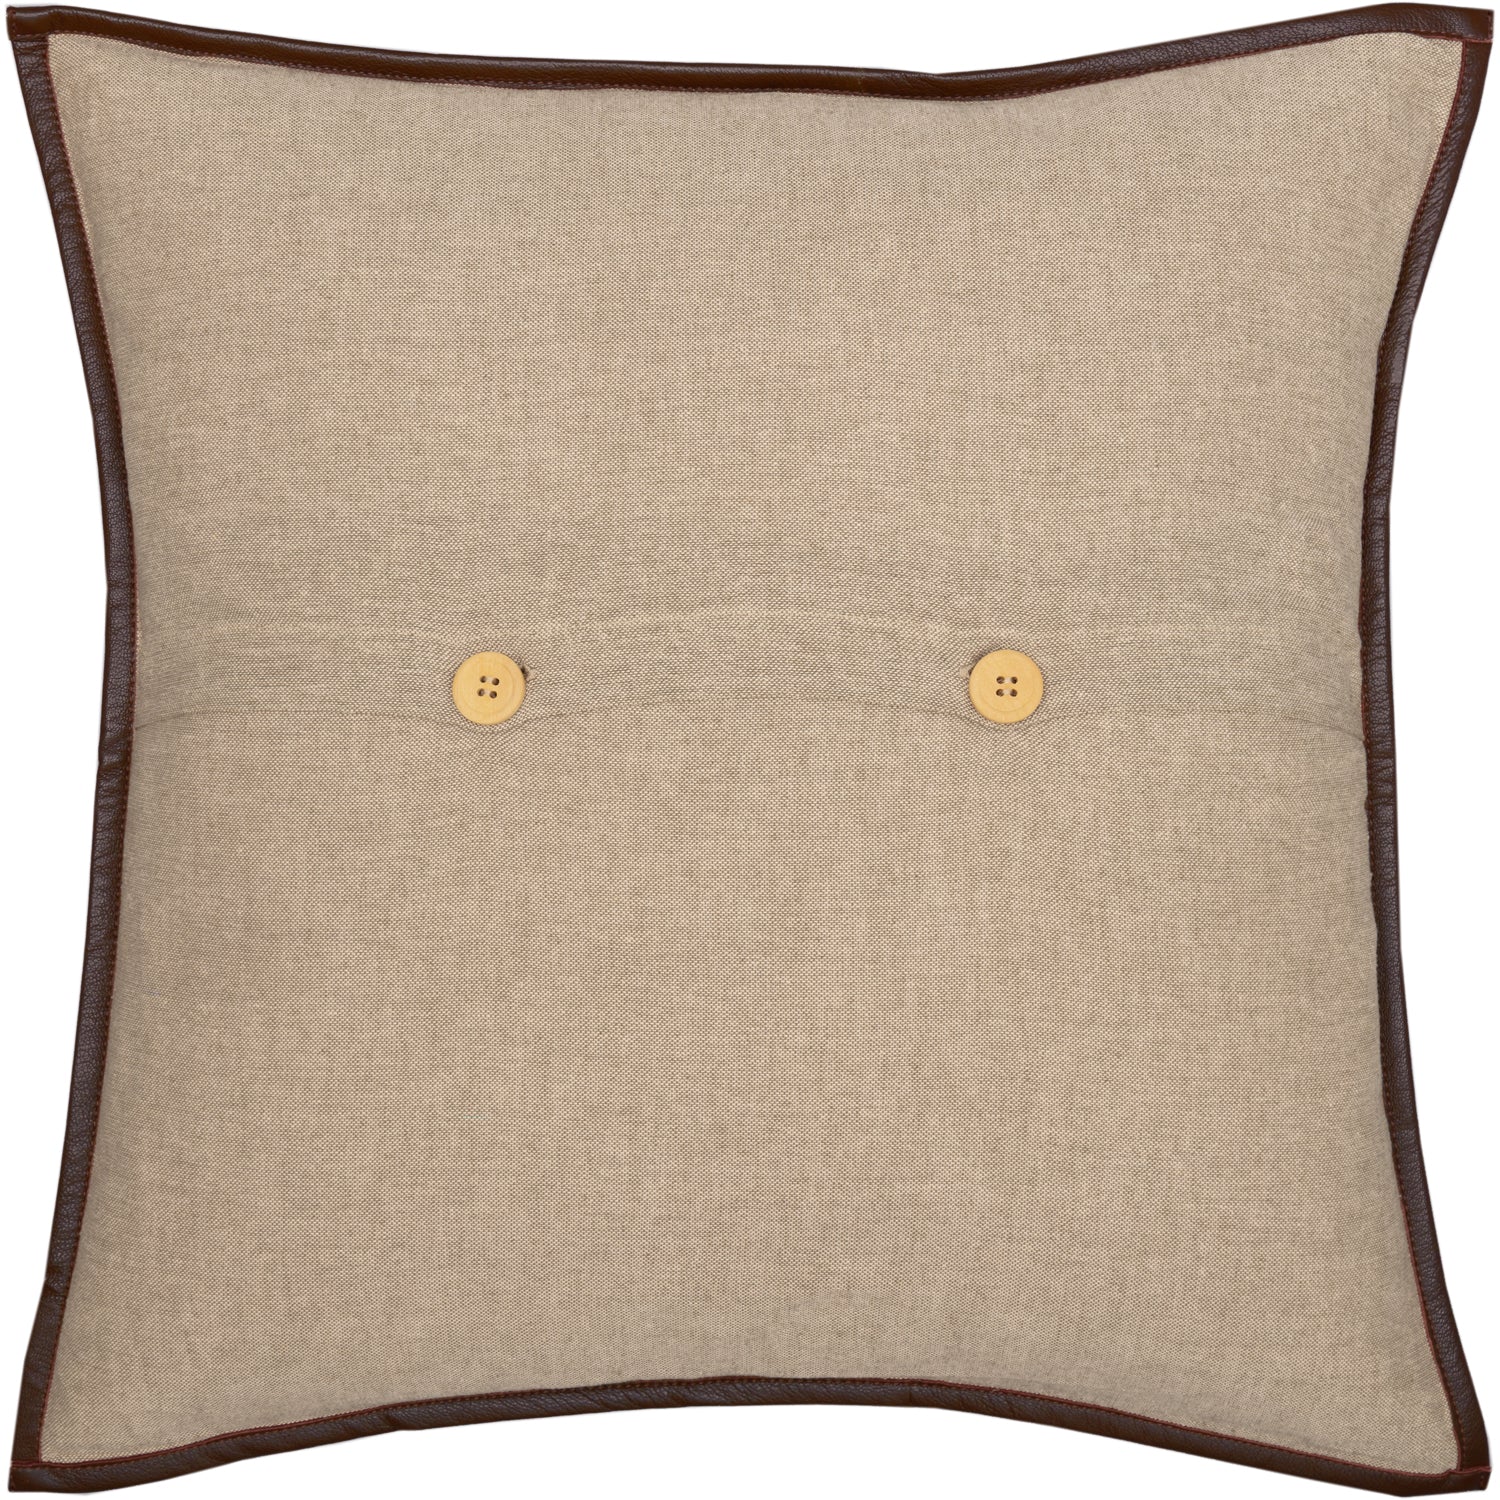 Oak & Asher Rory Horse Pillow 18x18 By VHC Brands